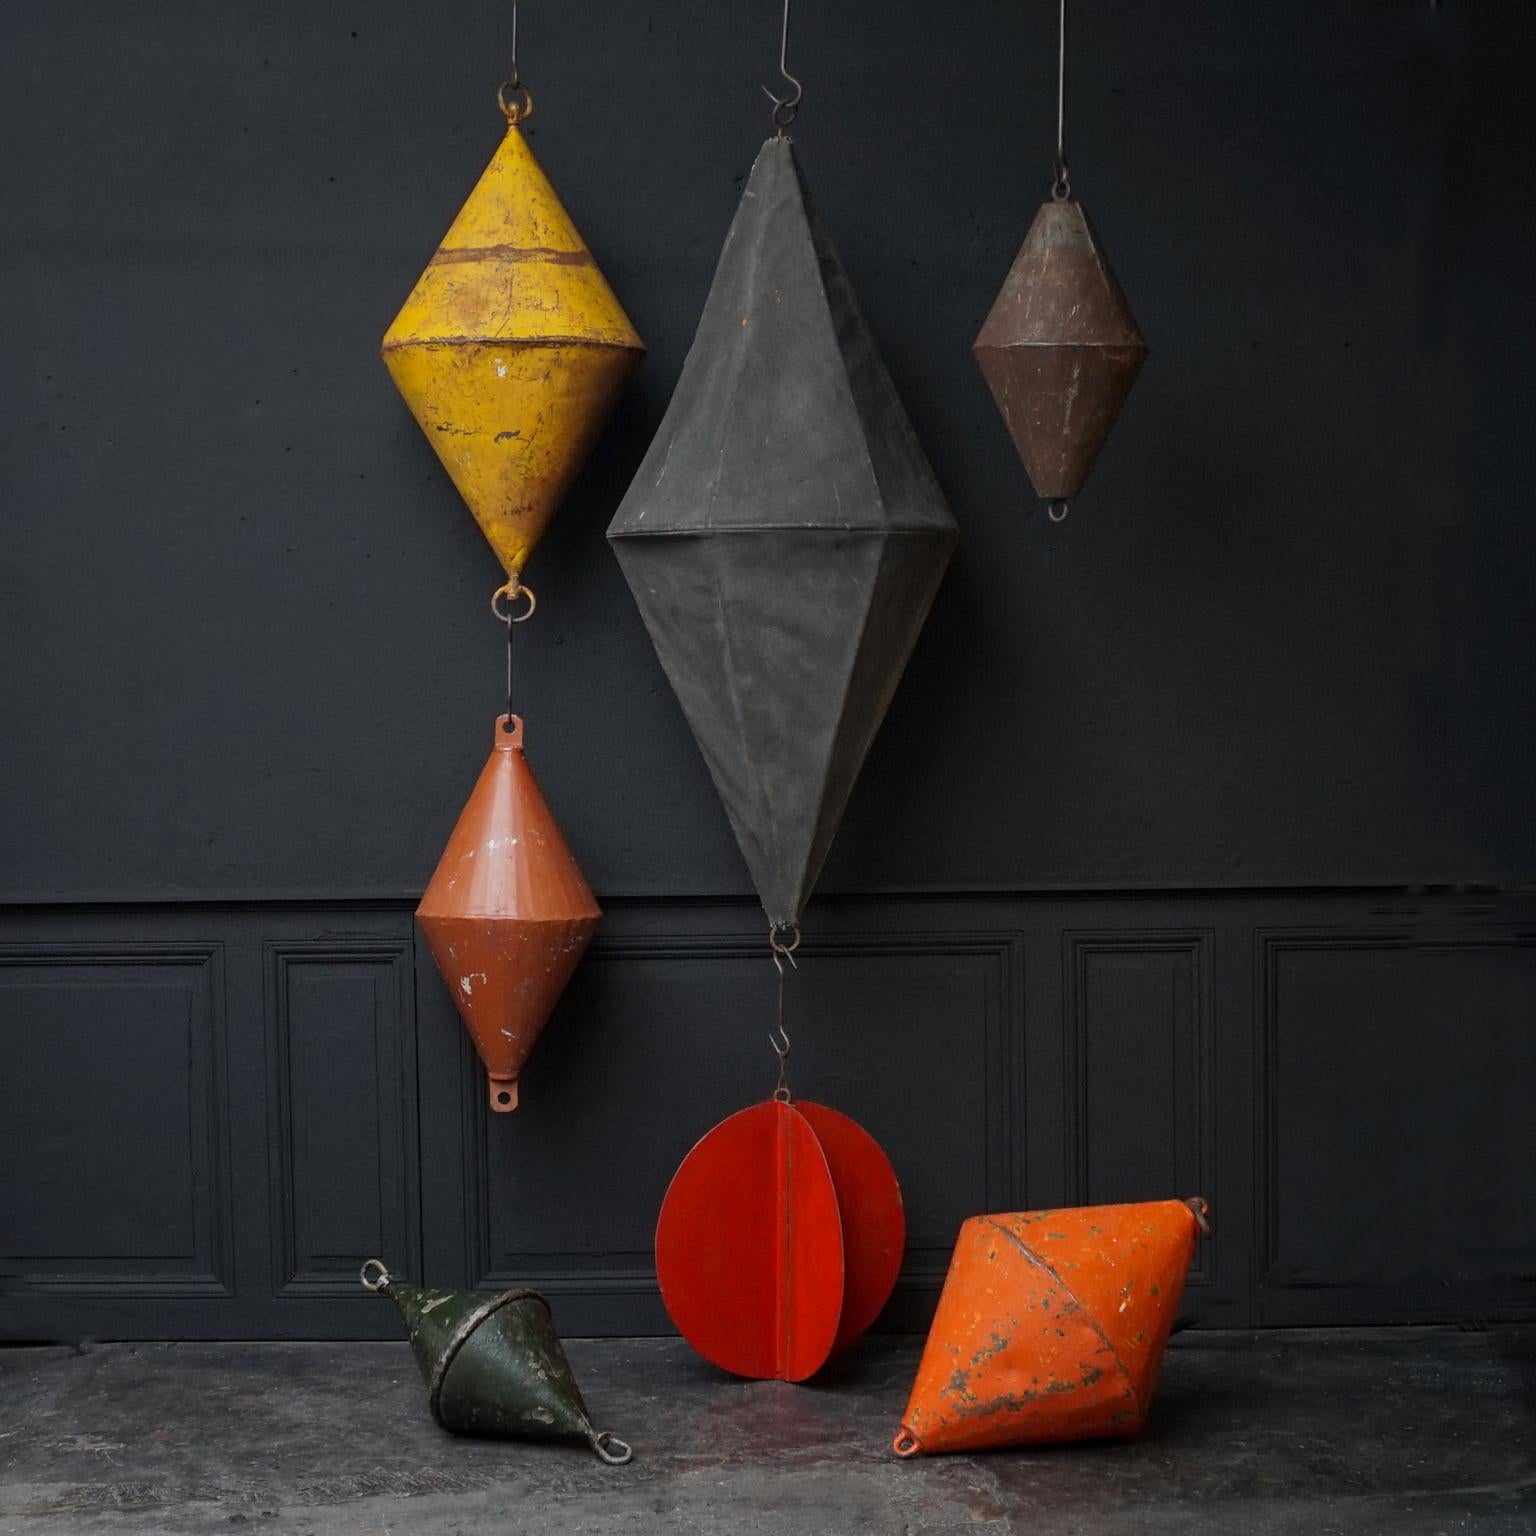 Set of seven very decorative antique early 1920s Dutch marine signal day shapes and metal buoys.
Two signal day shapes and five metal buoys. 
Six of them are diamond or biconical shaped, one, the metal red one, shaped like a ball.

A day shape is a